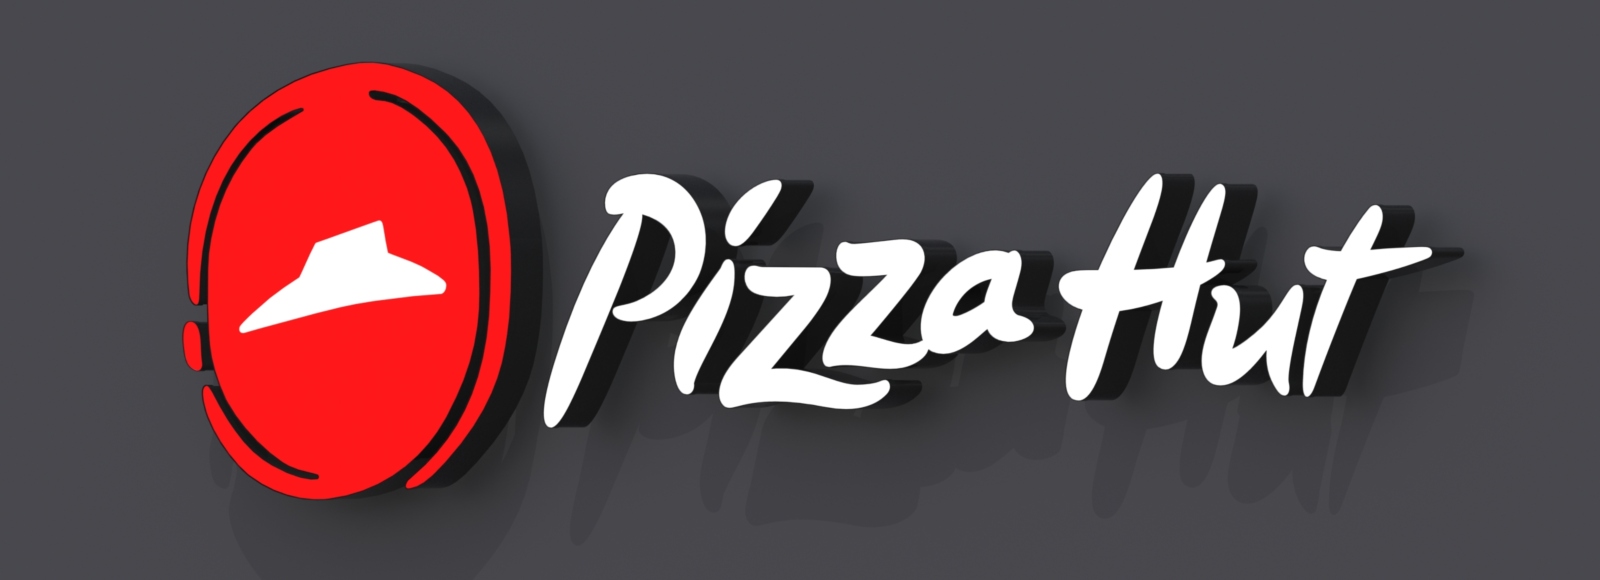 pizza hut, yum express, channel letters, rendering design